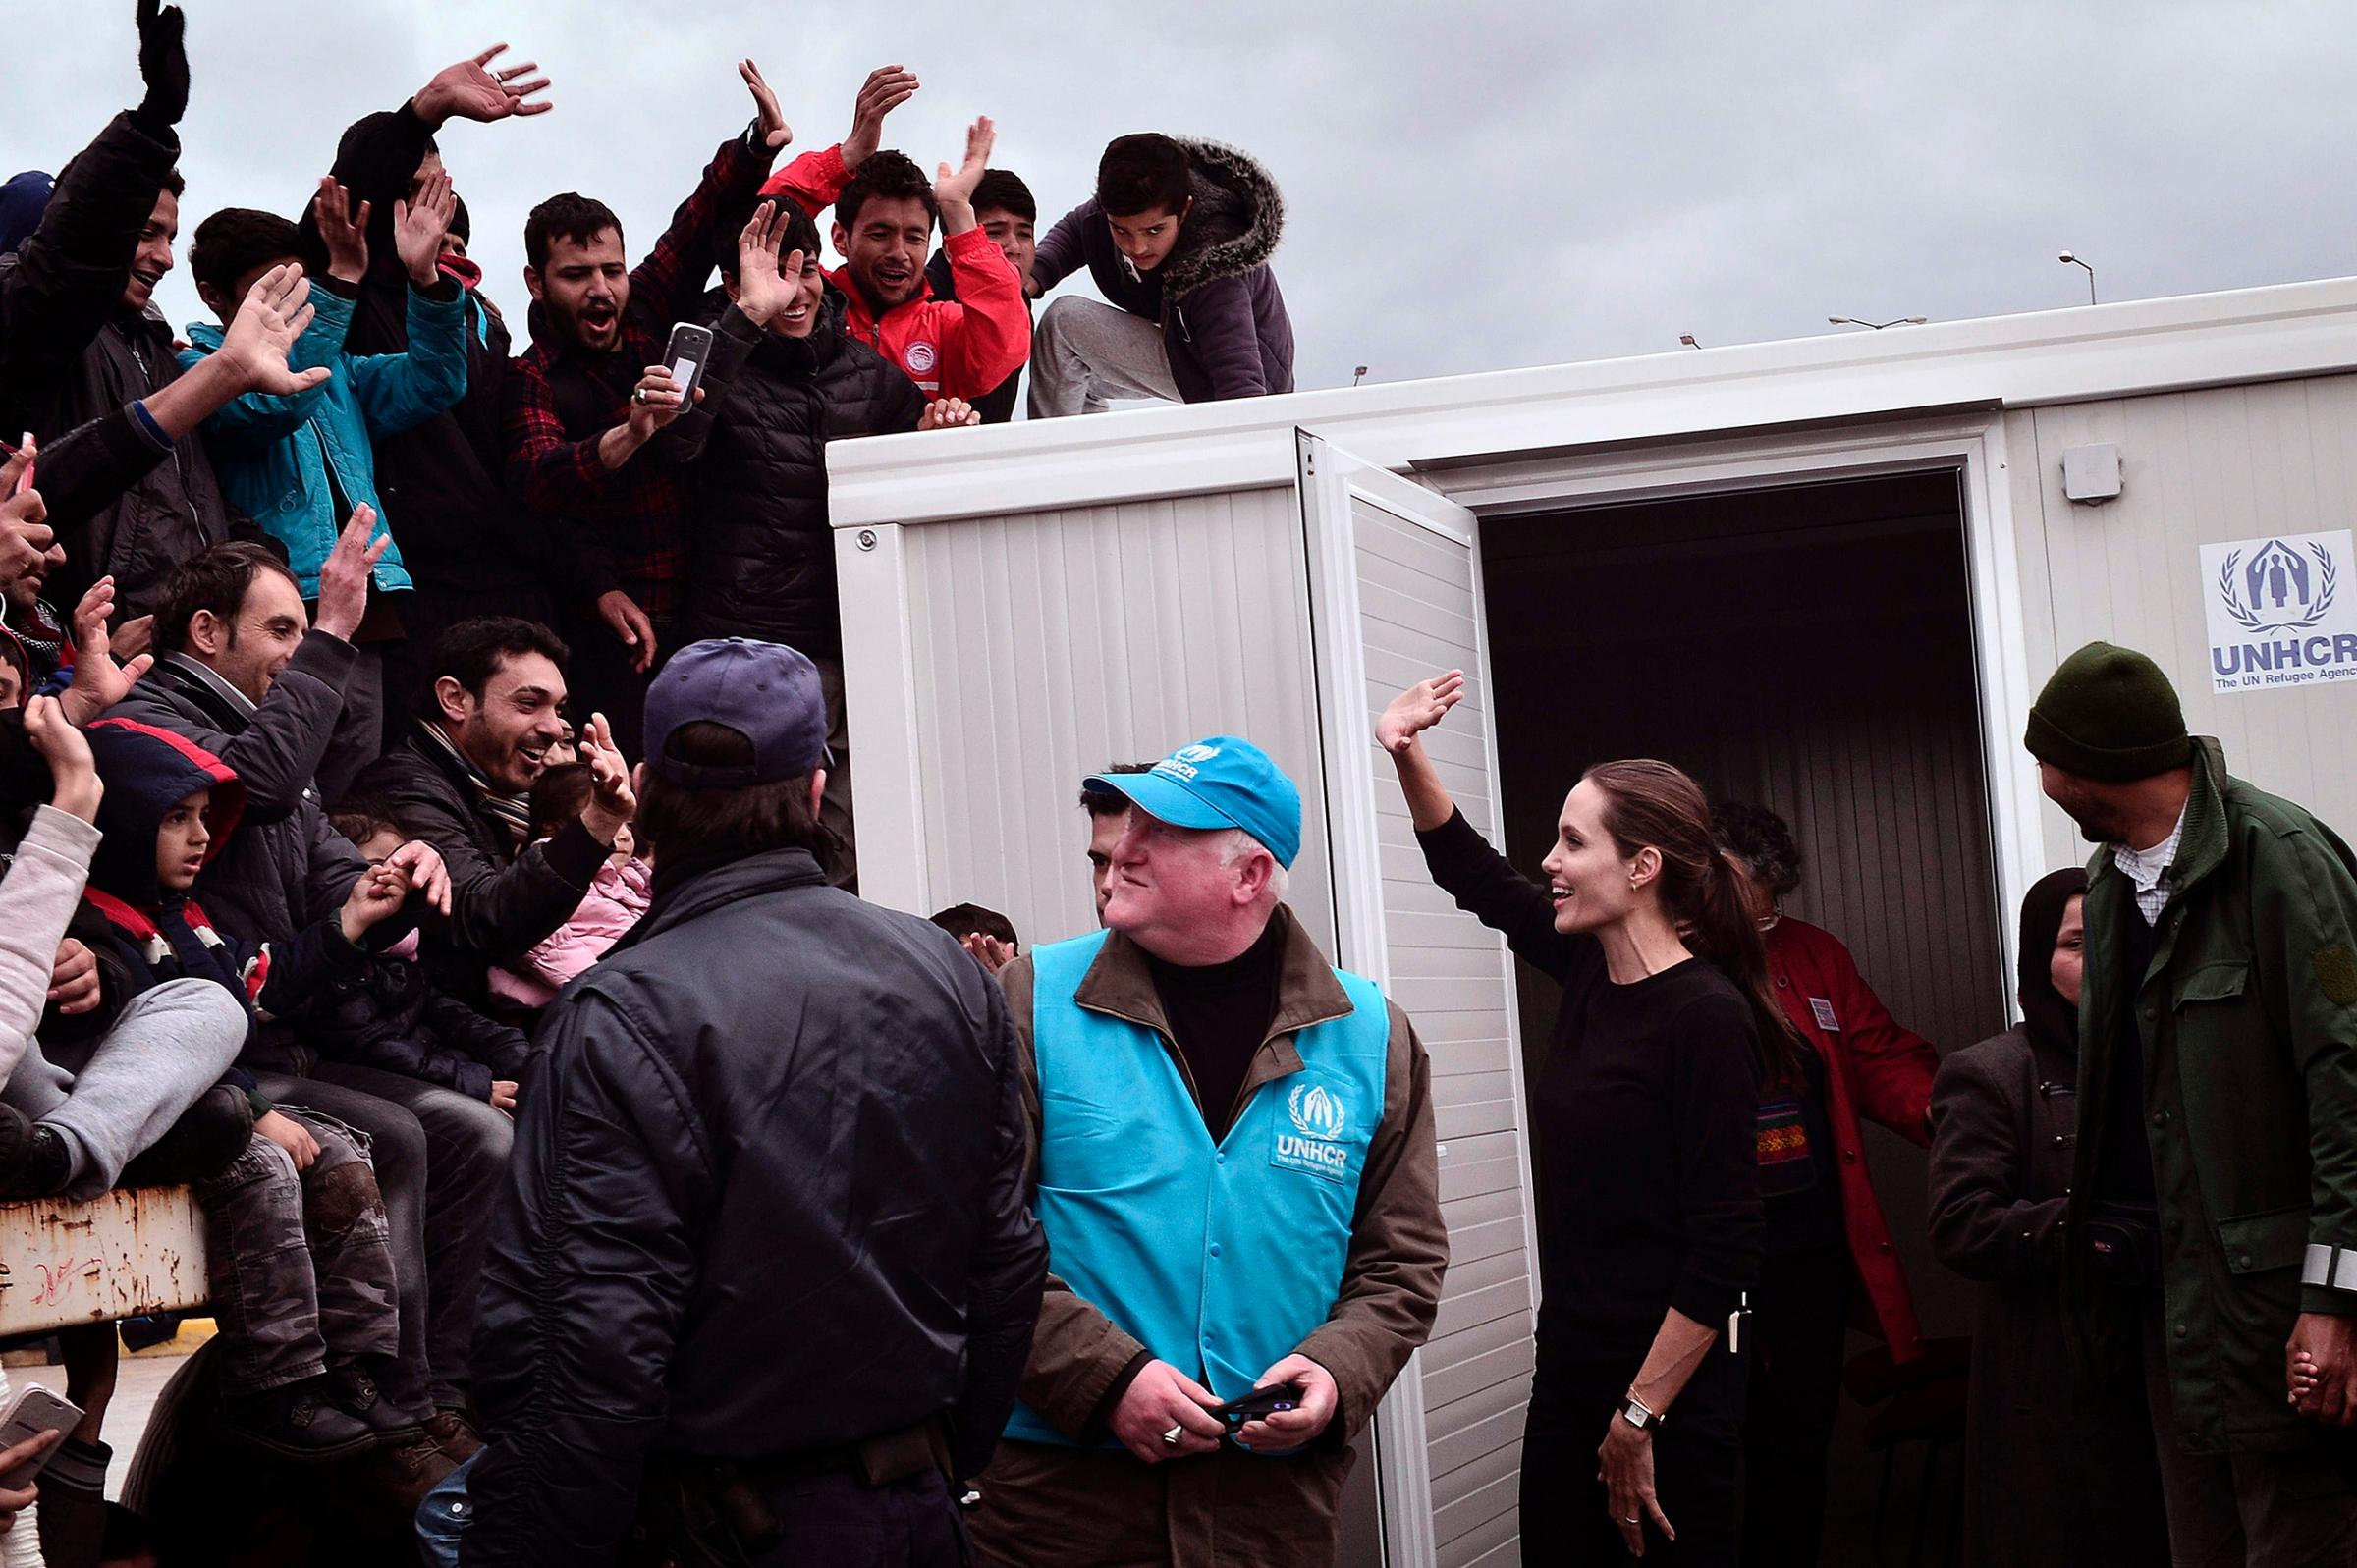 UNHCR's Goodwill Ambassador Angelina Jolie Pitt greets refugees and migrants during her visit to the port of Piraeus, Greece, March 16, 2016. She urged the international community to respond to Europe's worst refugee crisis since World War II with generosity and not the "politics of fear."